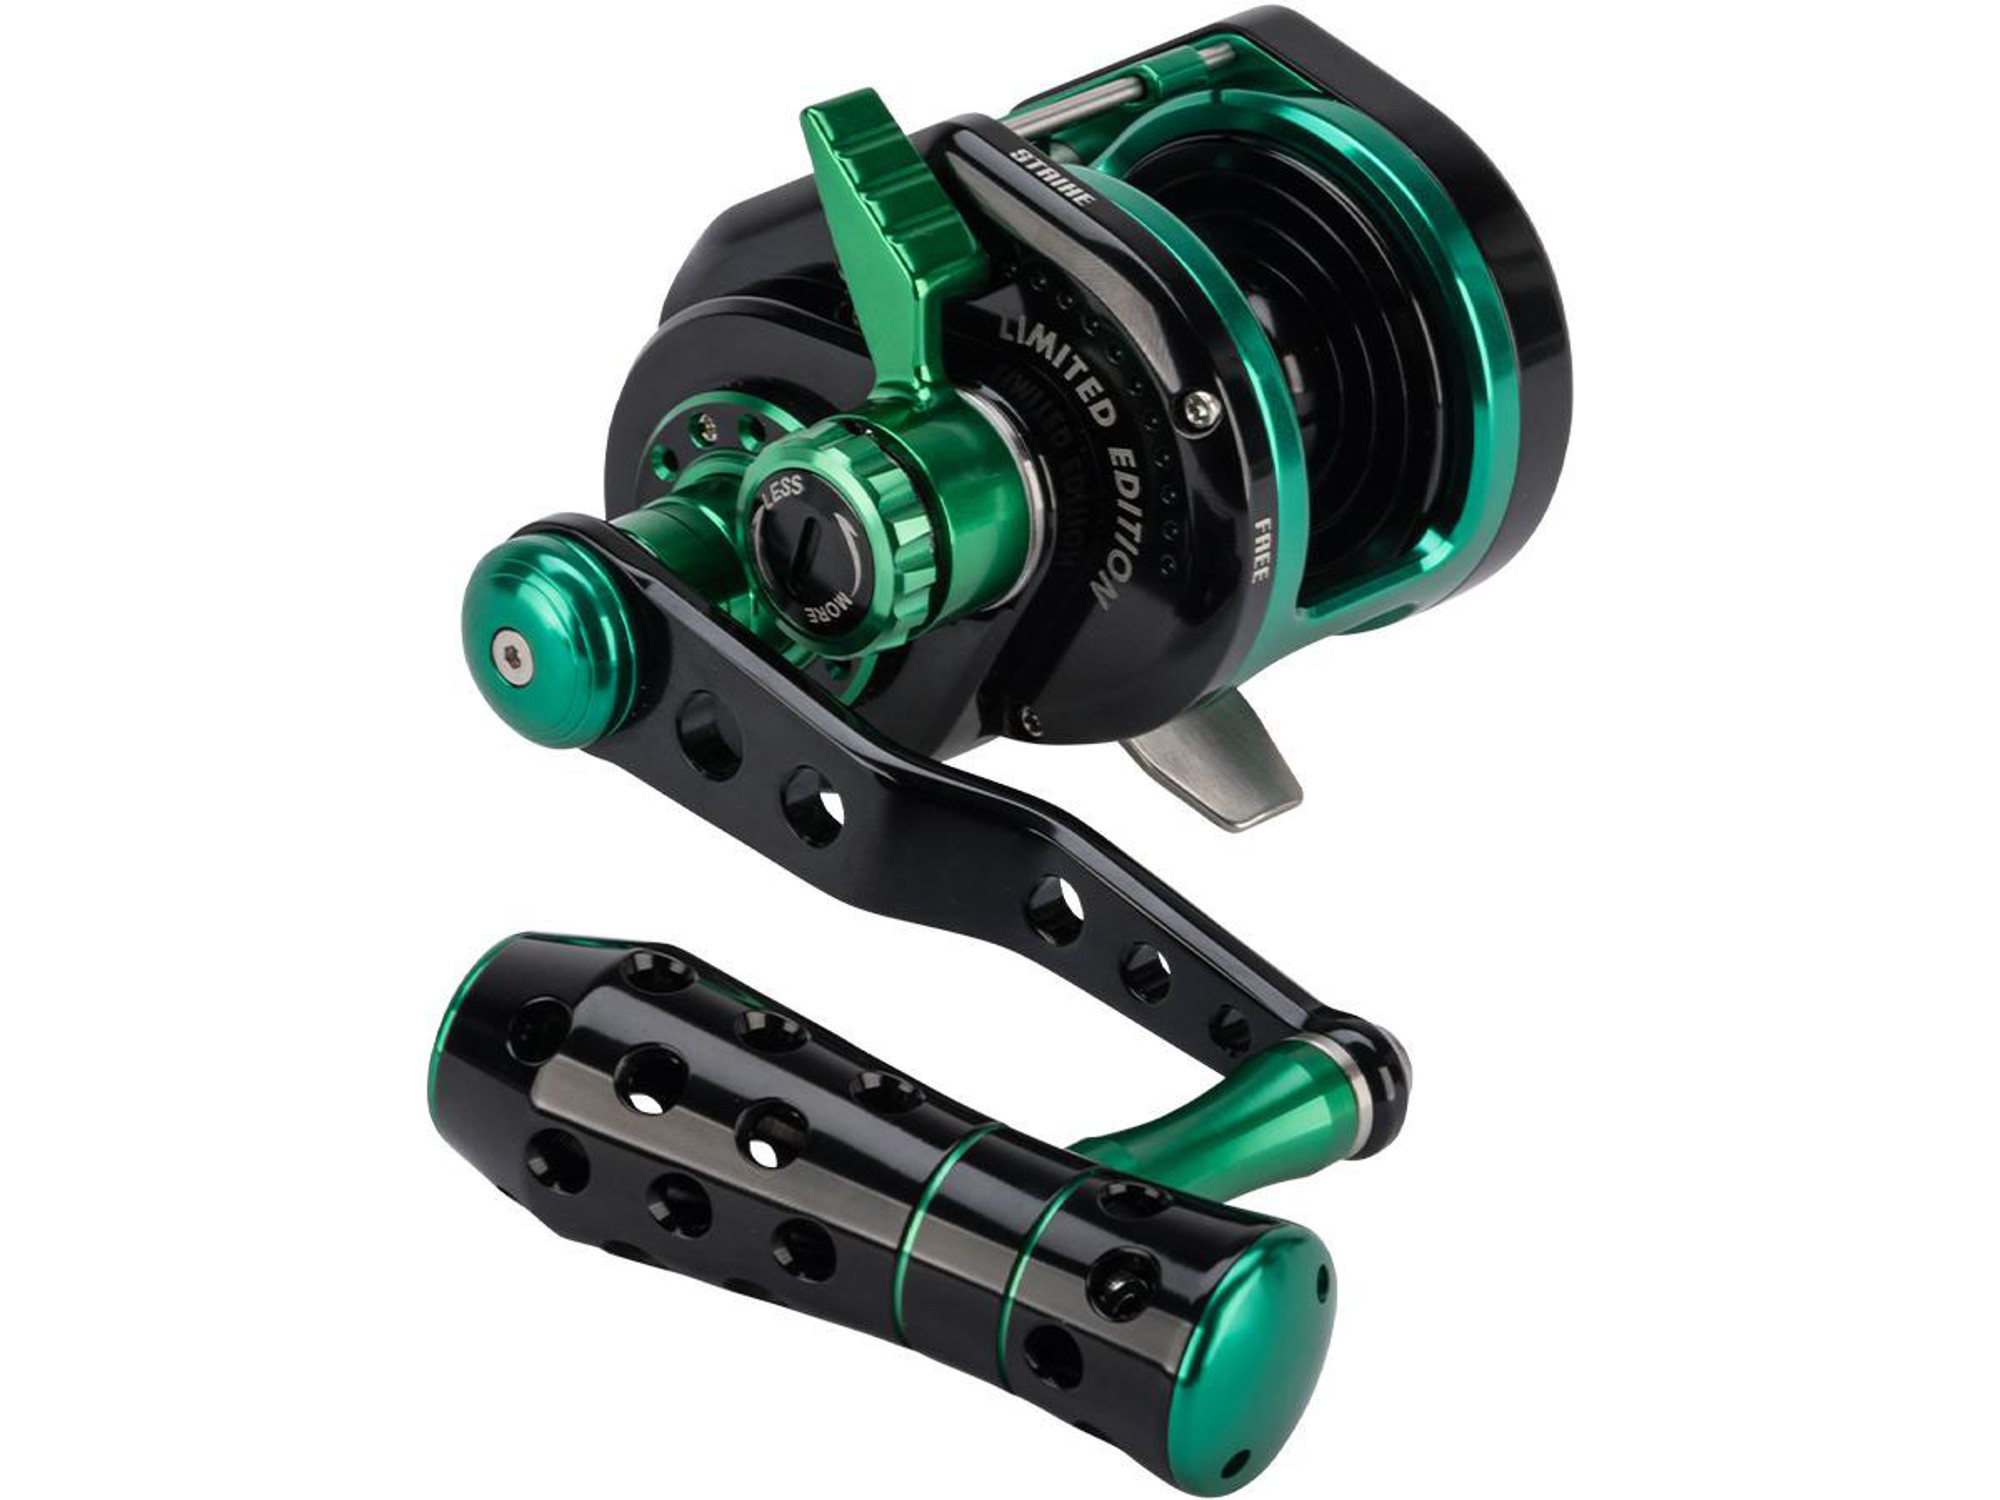 Jigging Master VIP Limited Edition Wiki Violent Slow Lever Wind Fishing Reel w/ Automatic Line Guide (Model: 1500XH Left Hand)